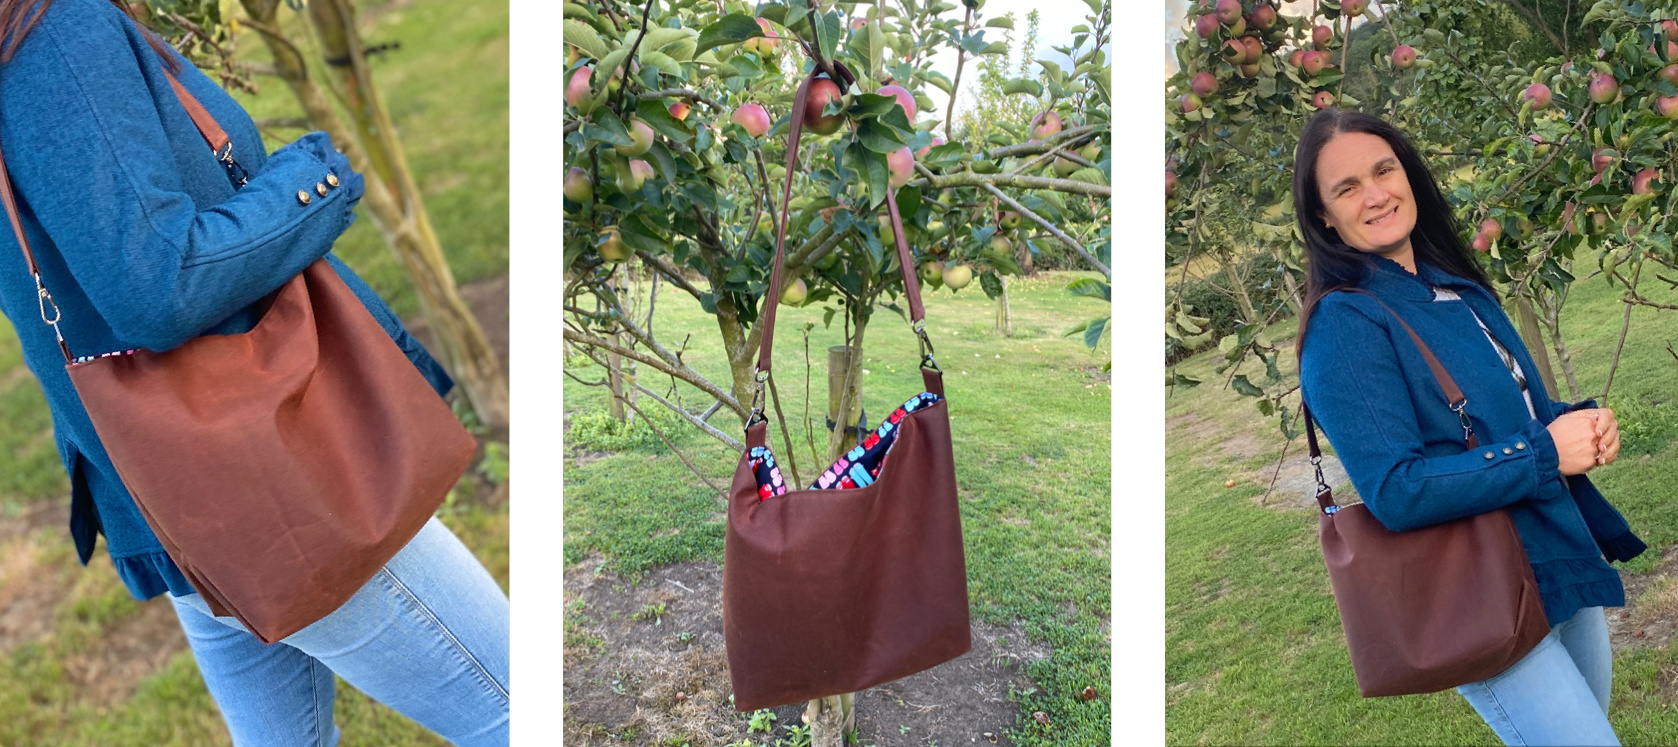 The Cwtsh Bag charity PDF pattern from Sewing Patterns by Junyuan 
, made by Amanda Sykes